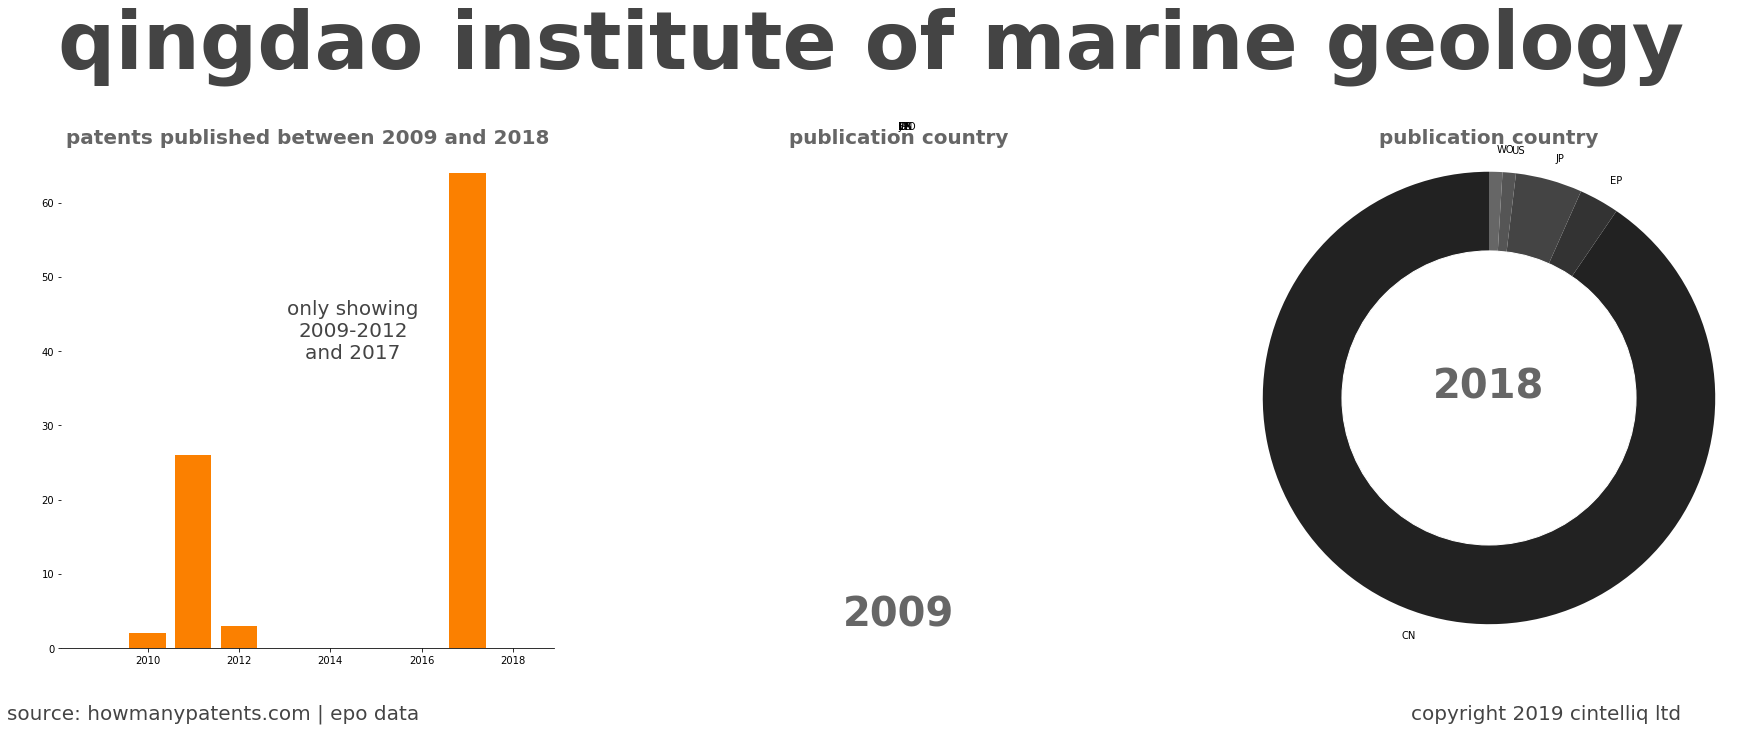 summary of patents for Qingdao Institute Of Marine Geology